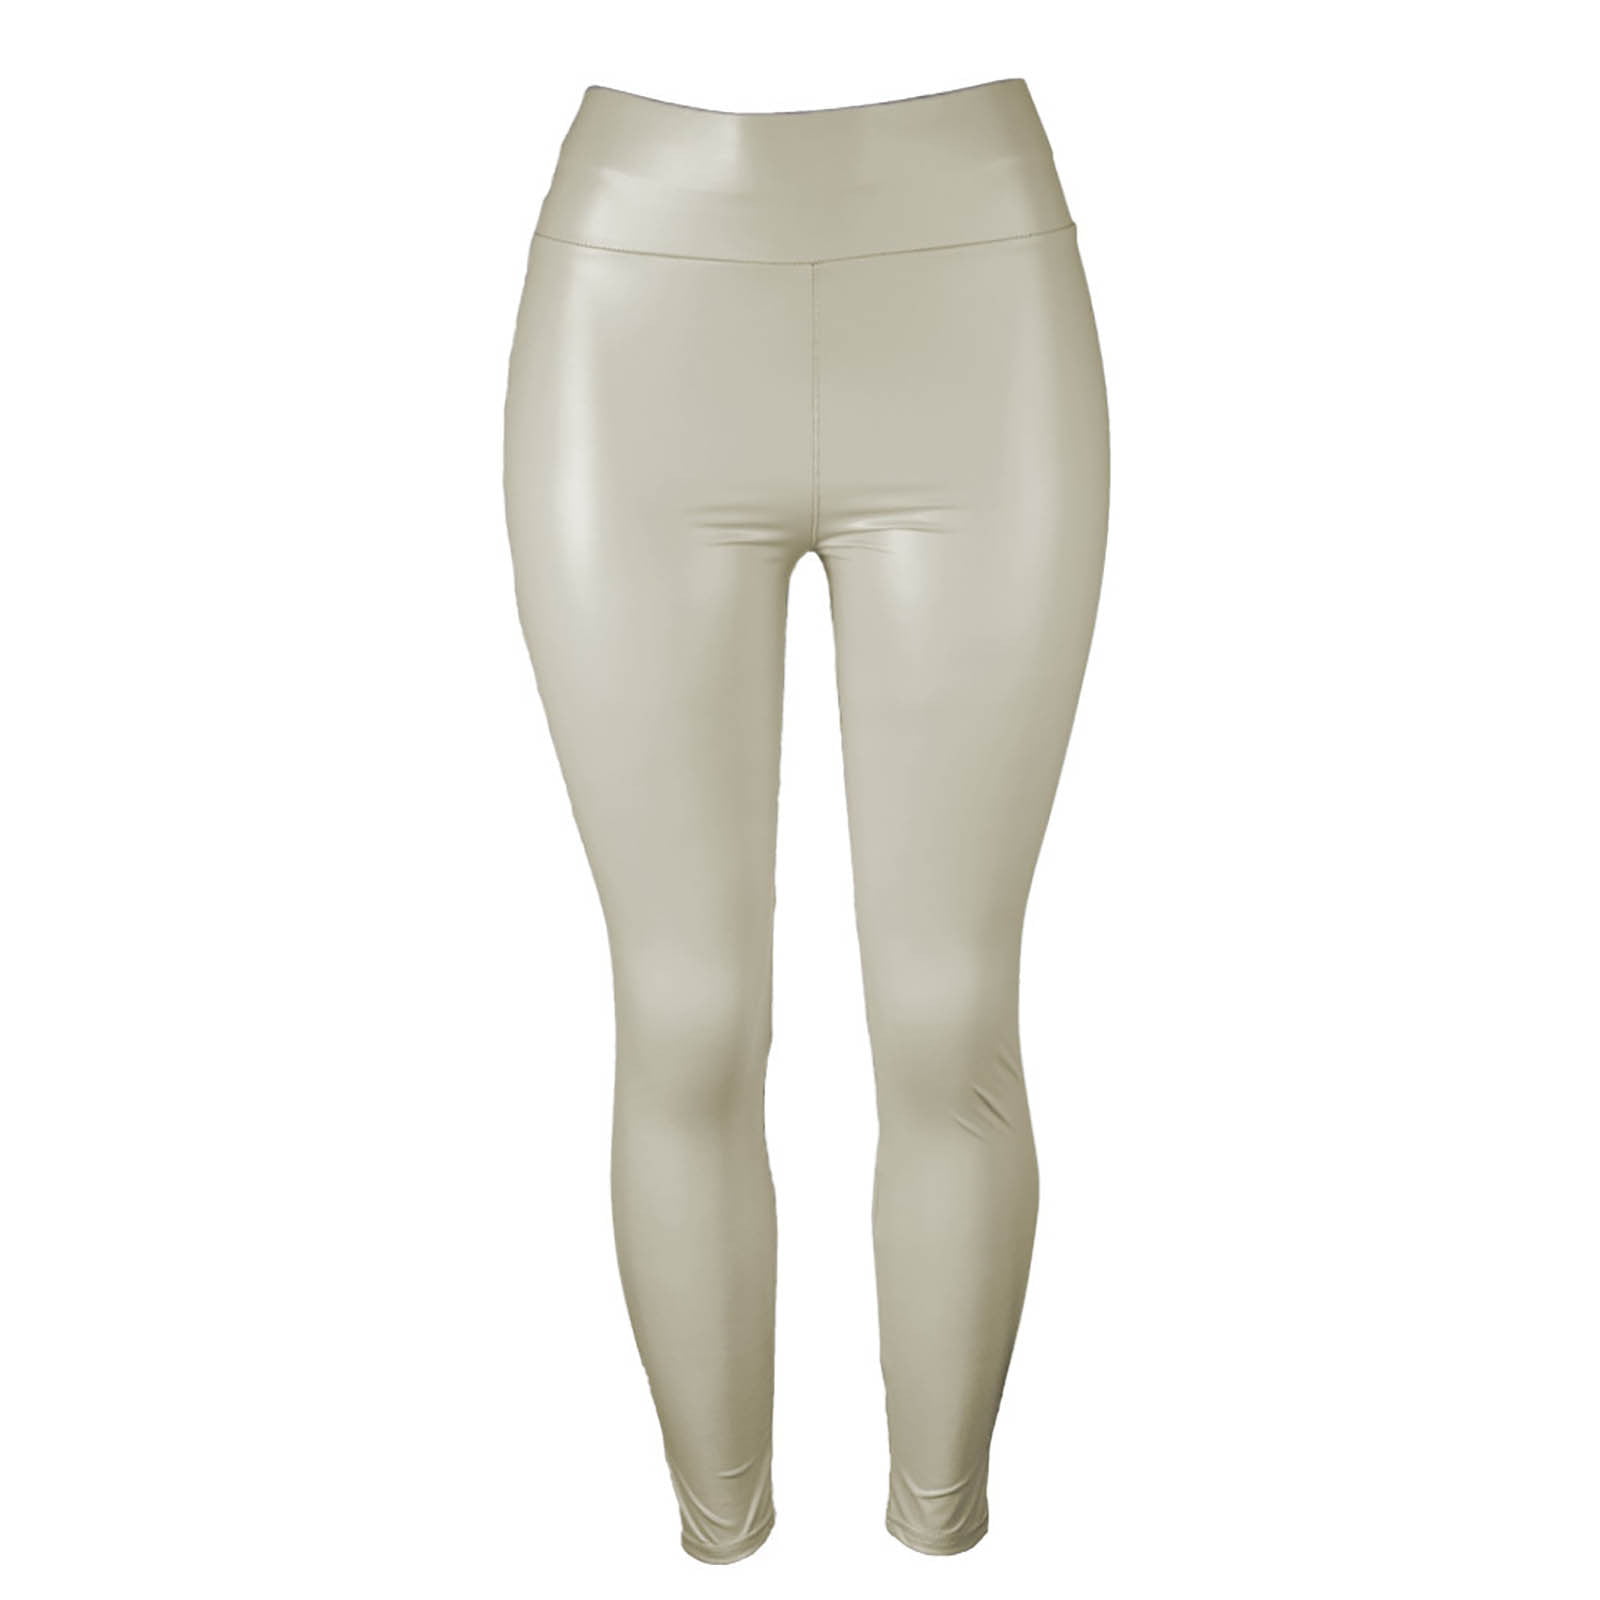 ASEIDFNSA Leather Pants for Women With Pockets Spanks Leather